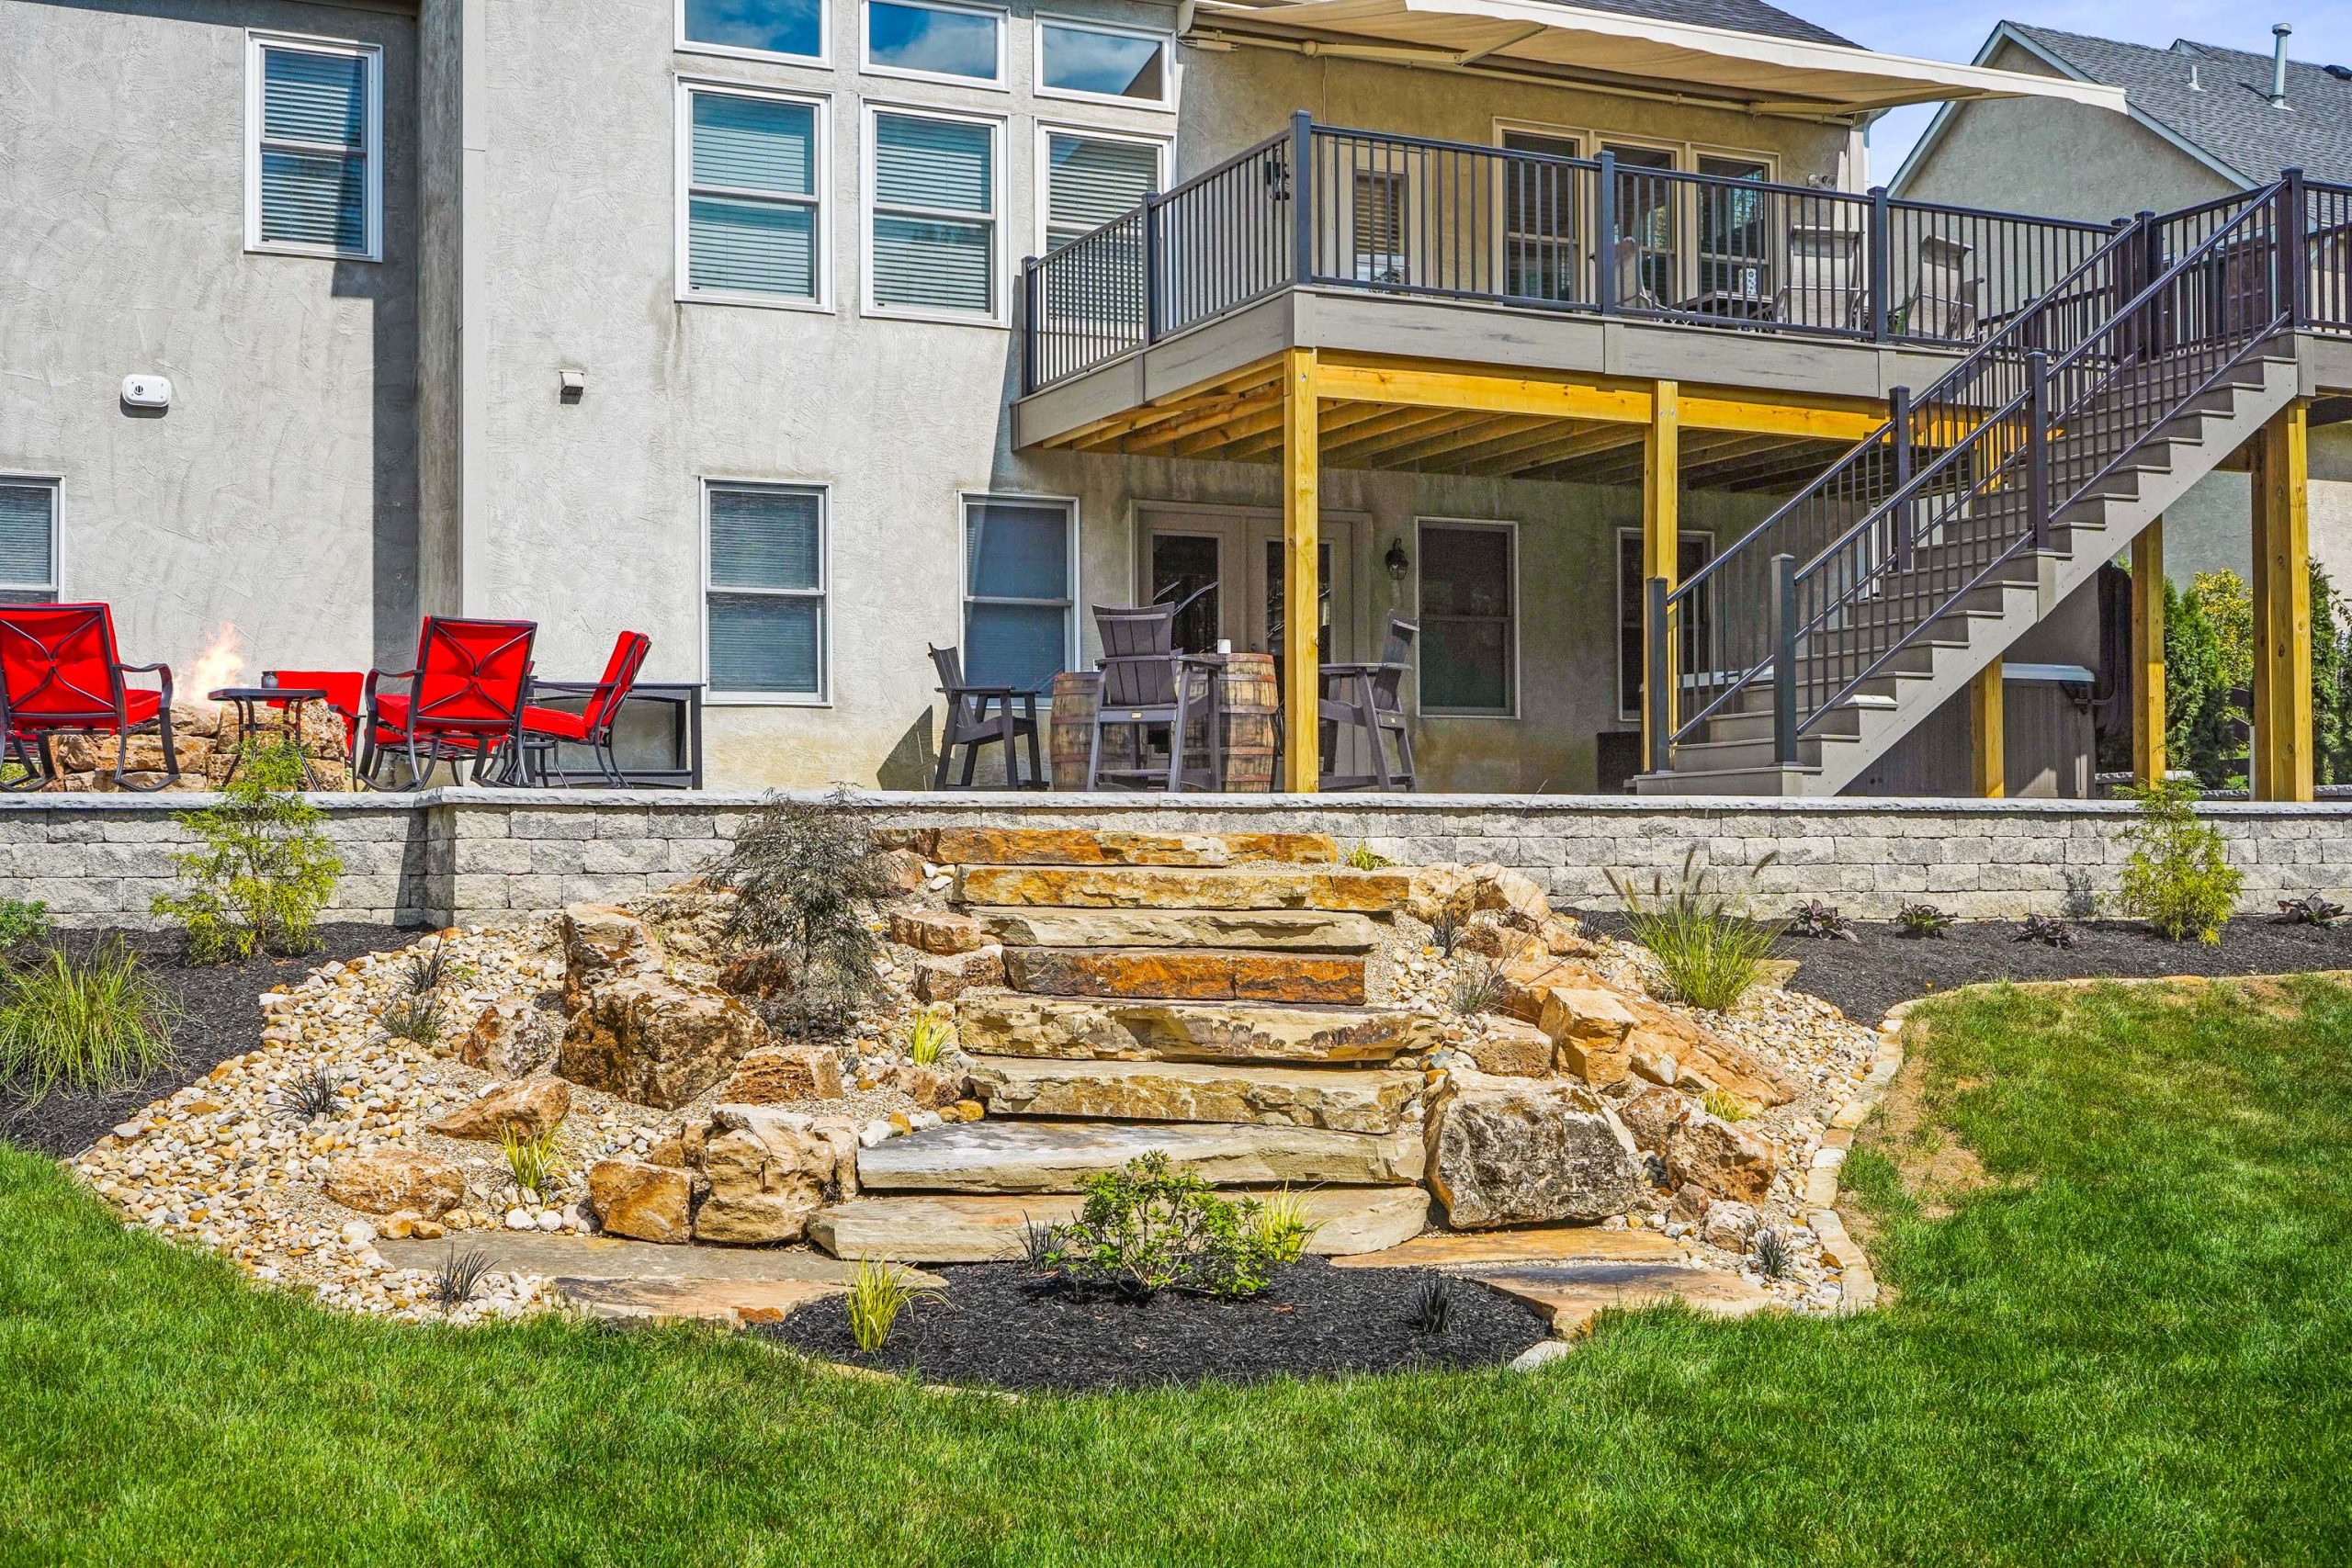 Full view of a storey house with patio upstairs, jacuzzi in shade downstairs, fireplace with red rocking chairs, stairs hardscape surrounded by shrubs and lawn.